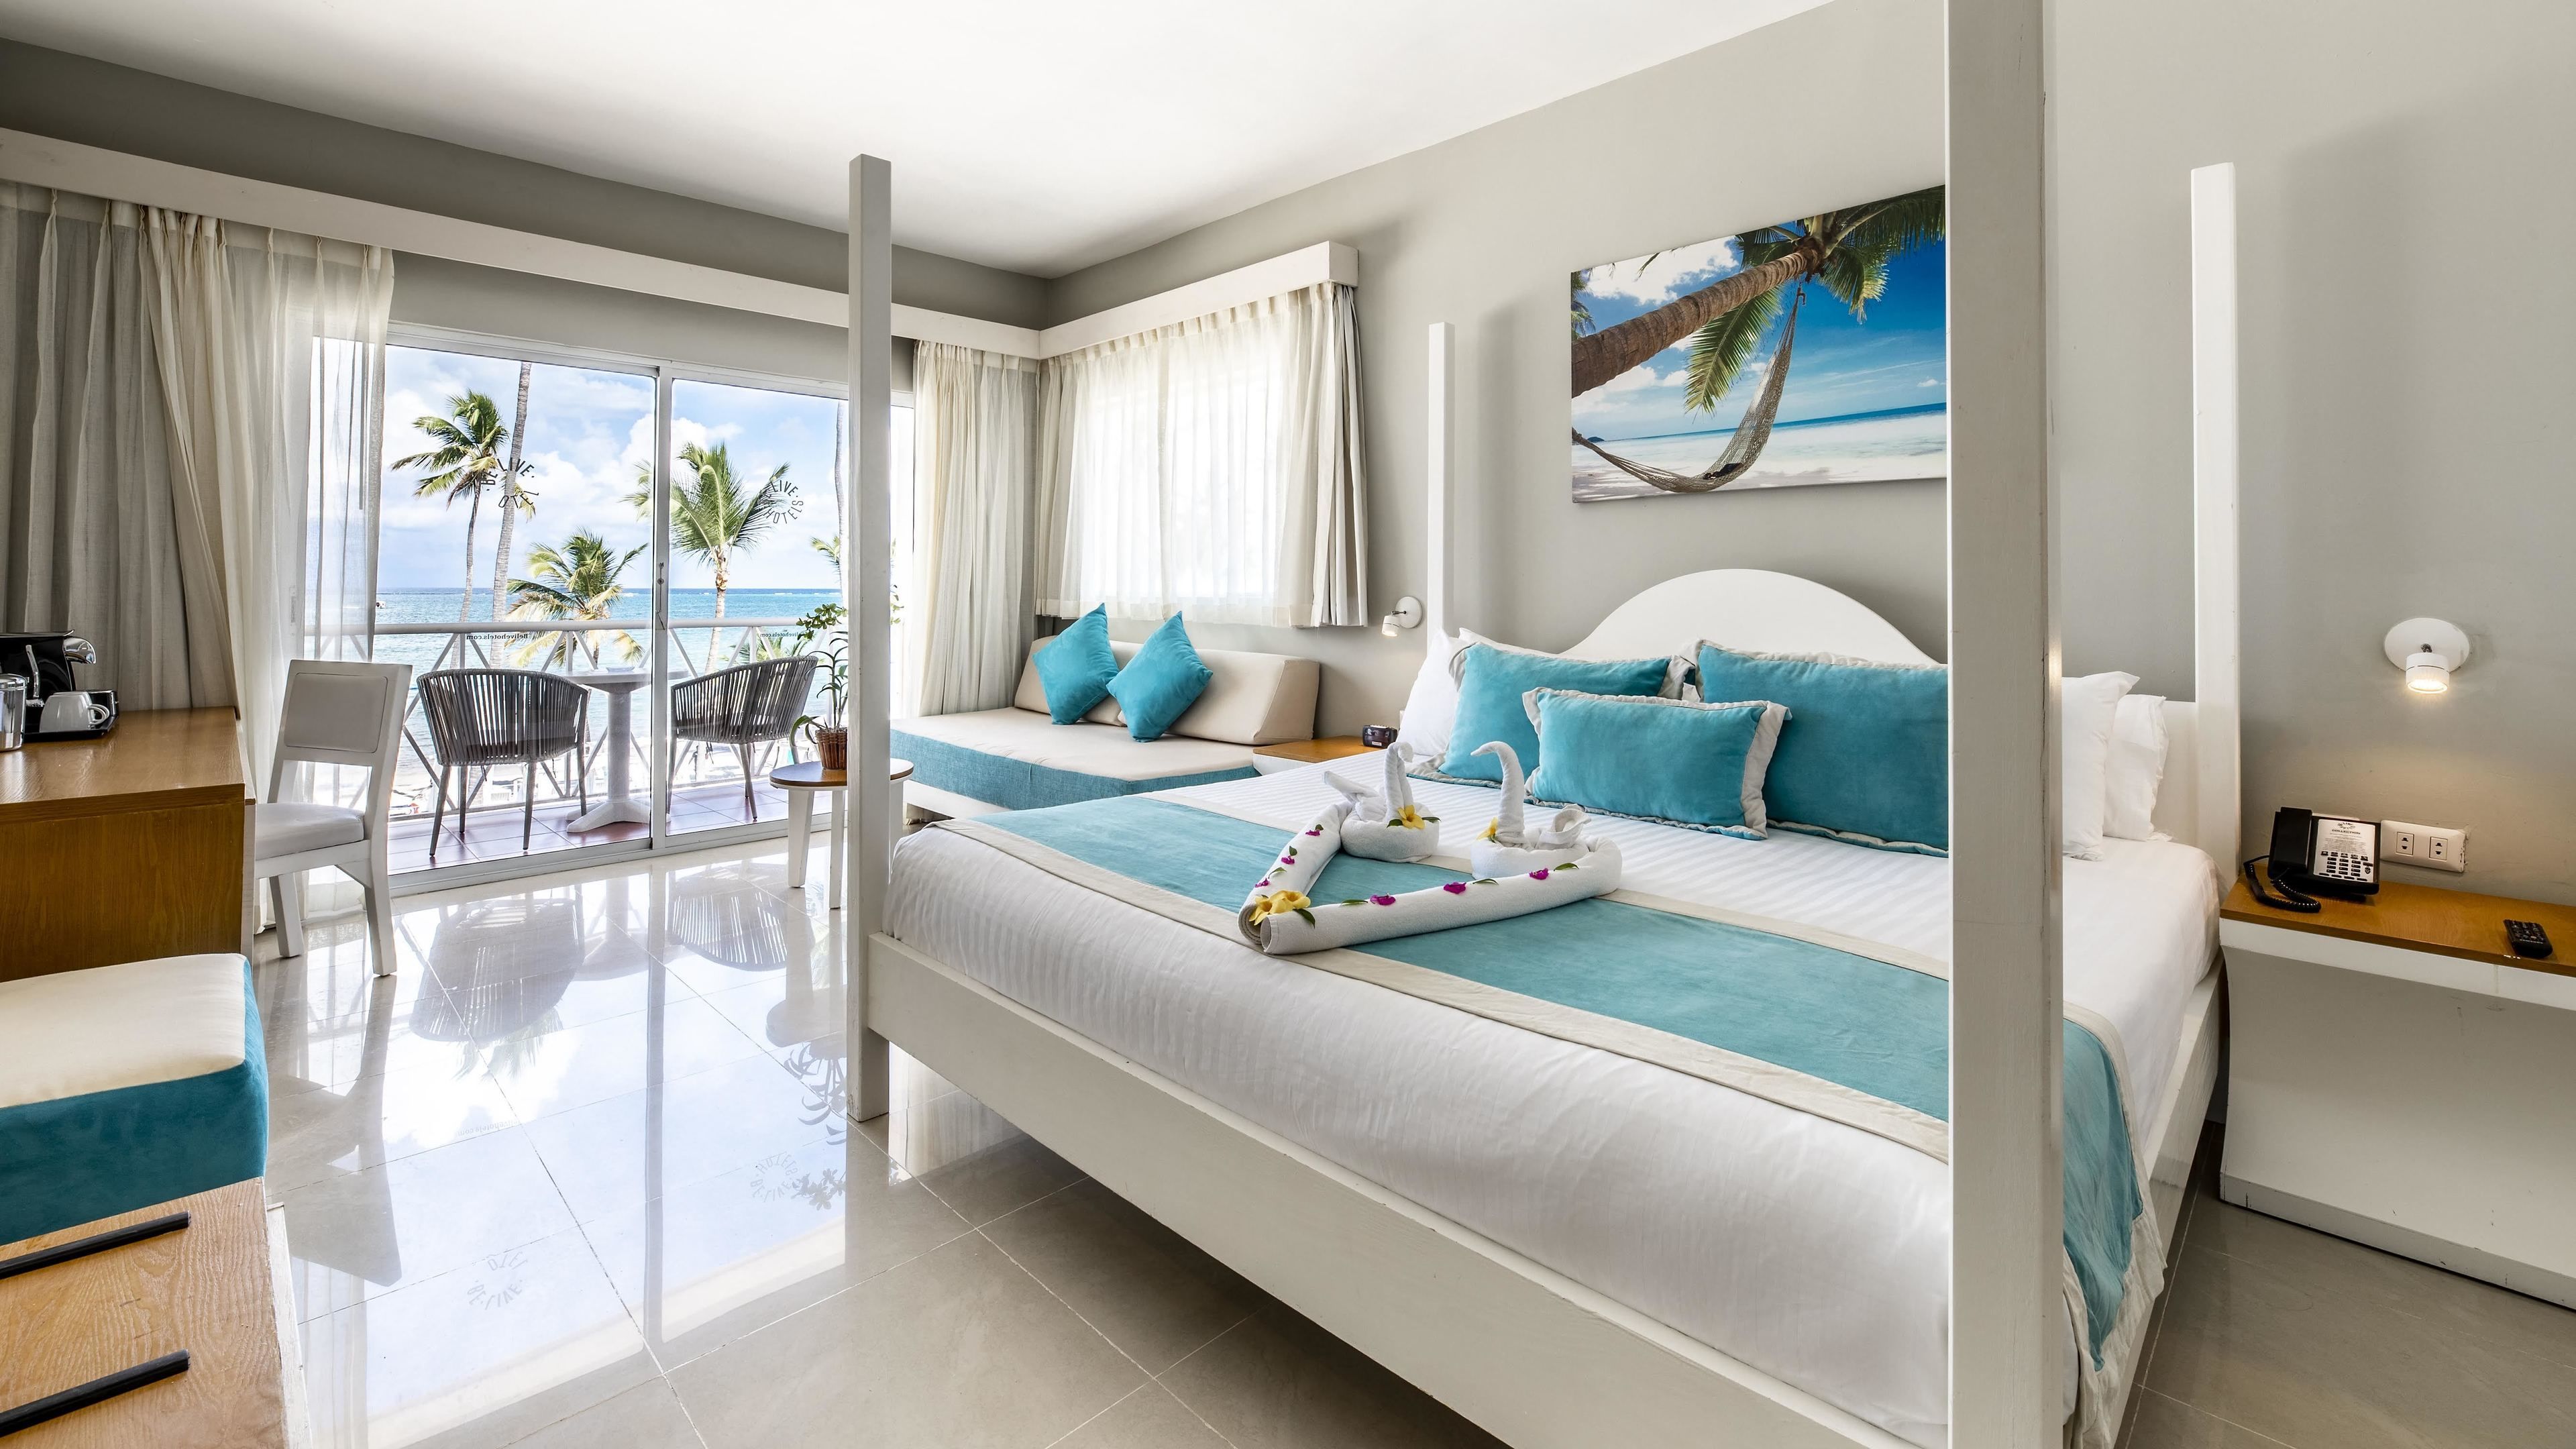 Be Live Collection Punta Cana - All Inclusive-Punta Cana Updated 2022 Room  Price-Reviews & Deals | Trip.com